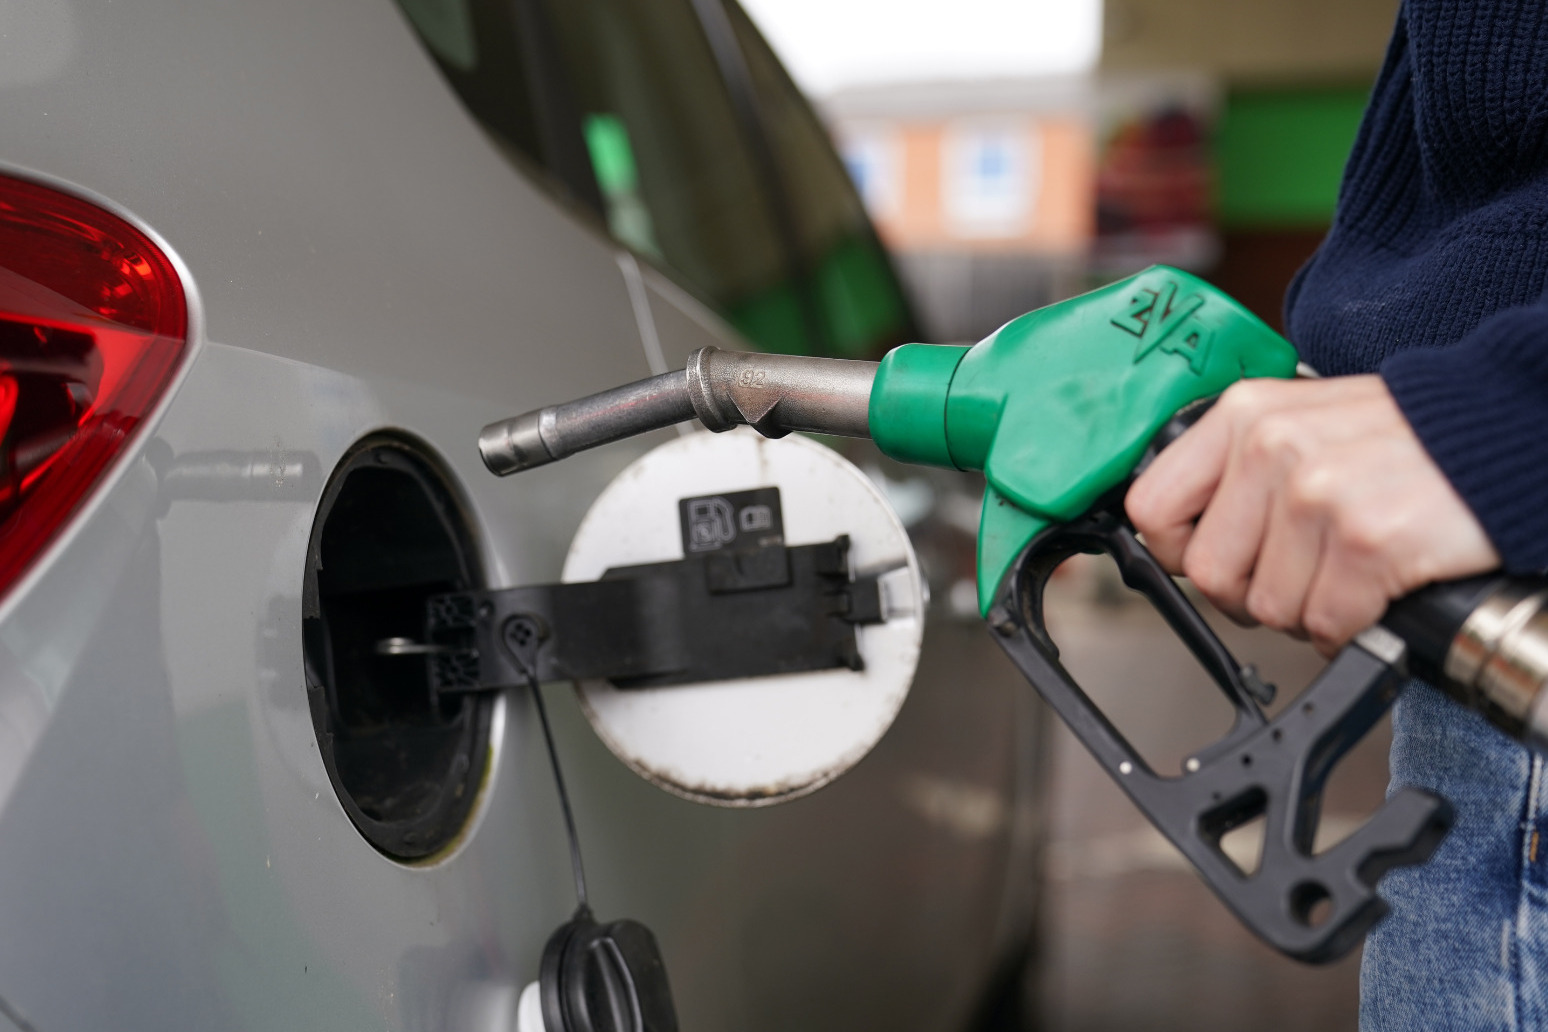 Petrol prices up 11 pence in May 